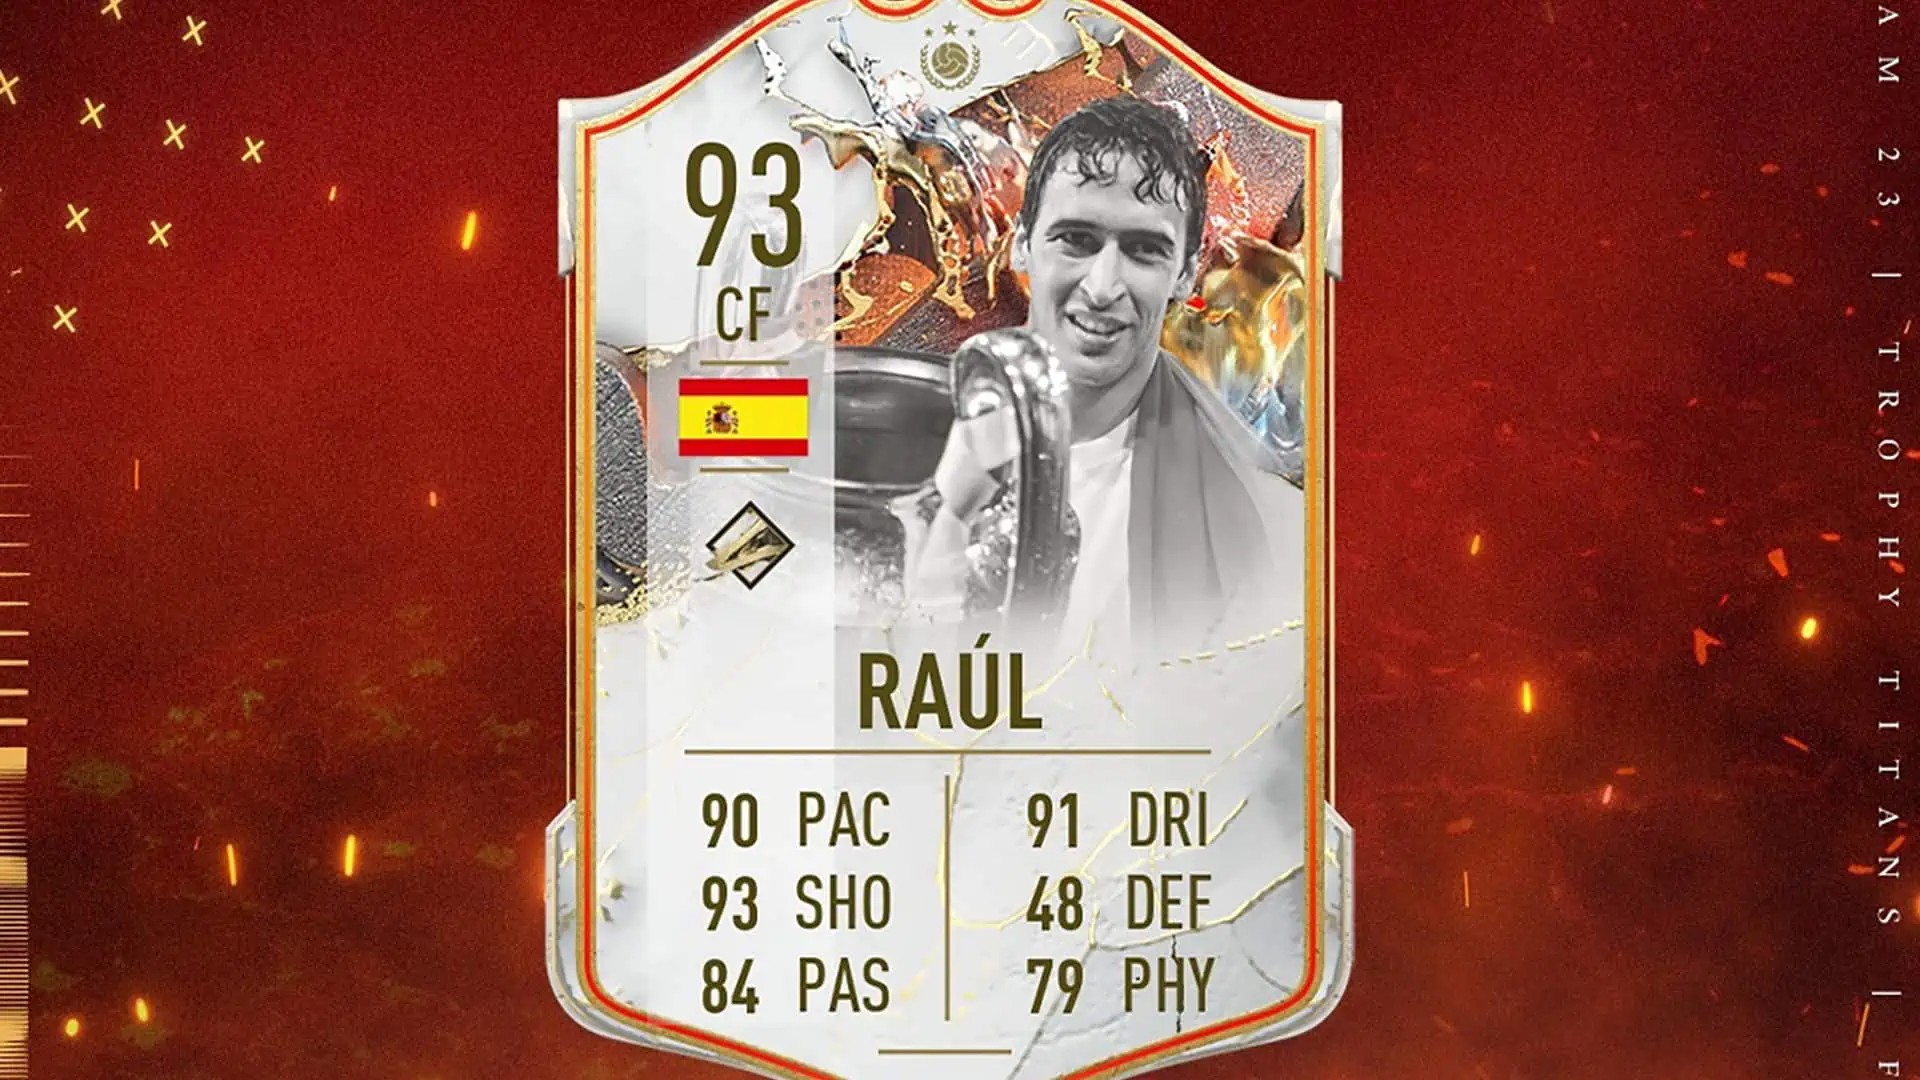 FIFA 23: How to get the Raul Icon Trophy Titans SBC